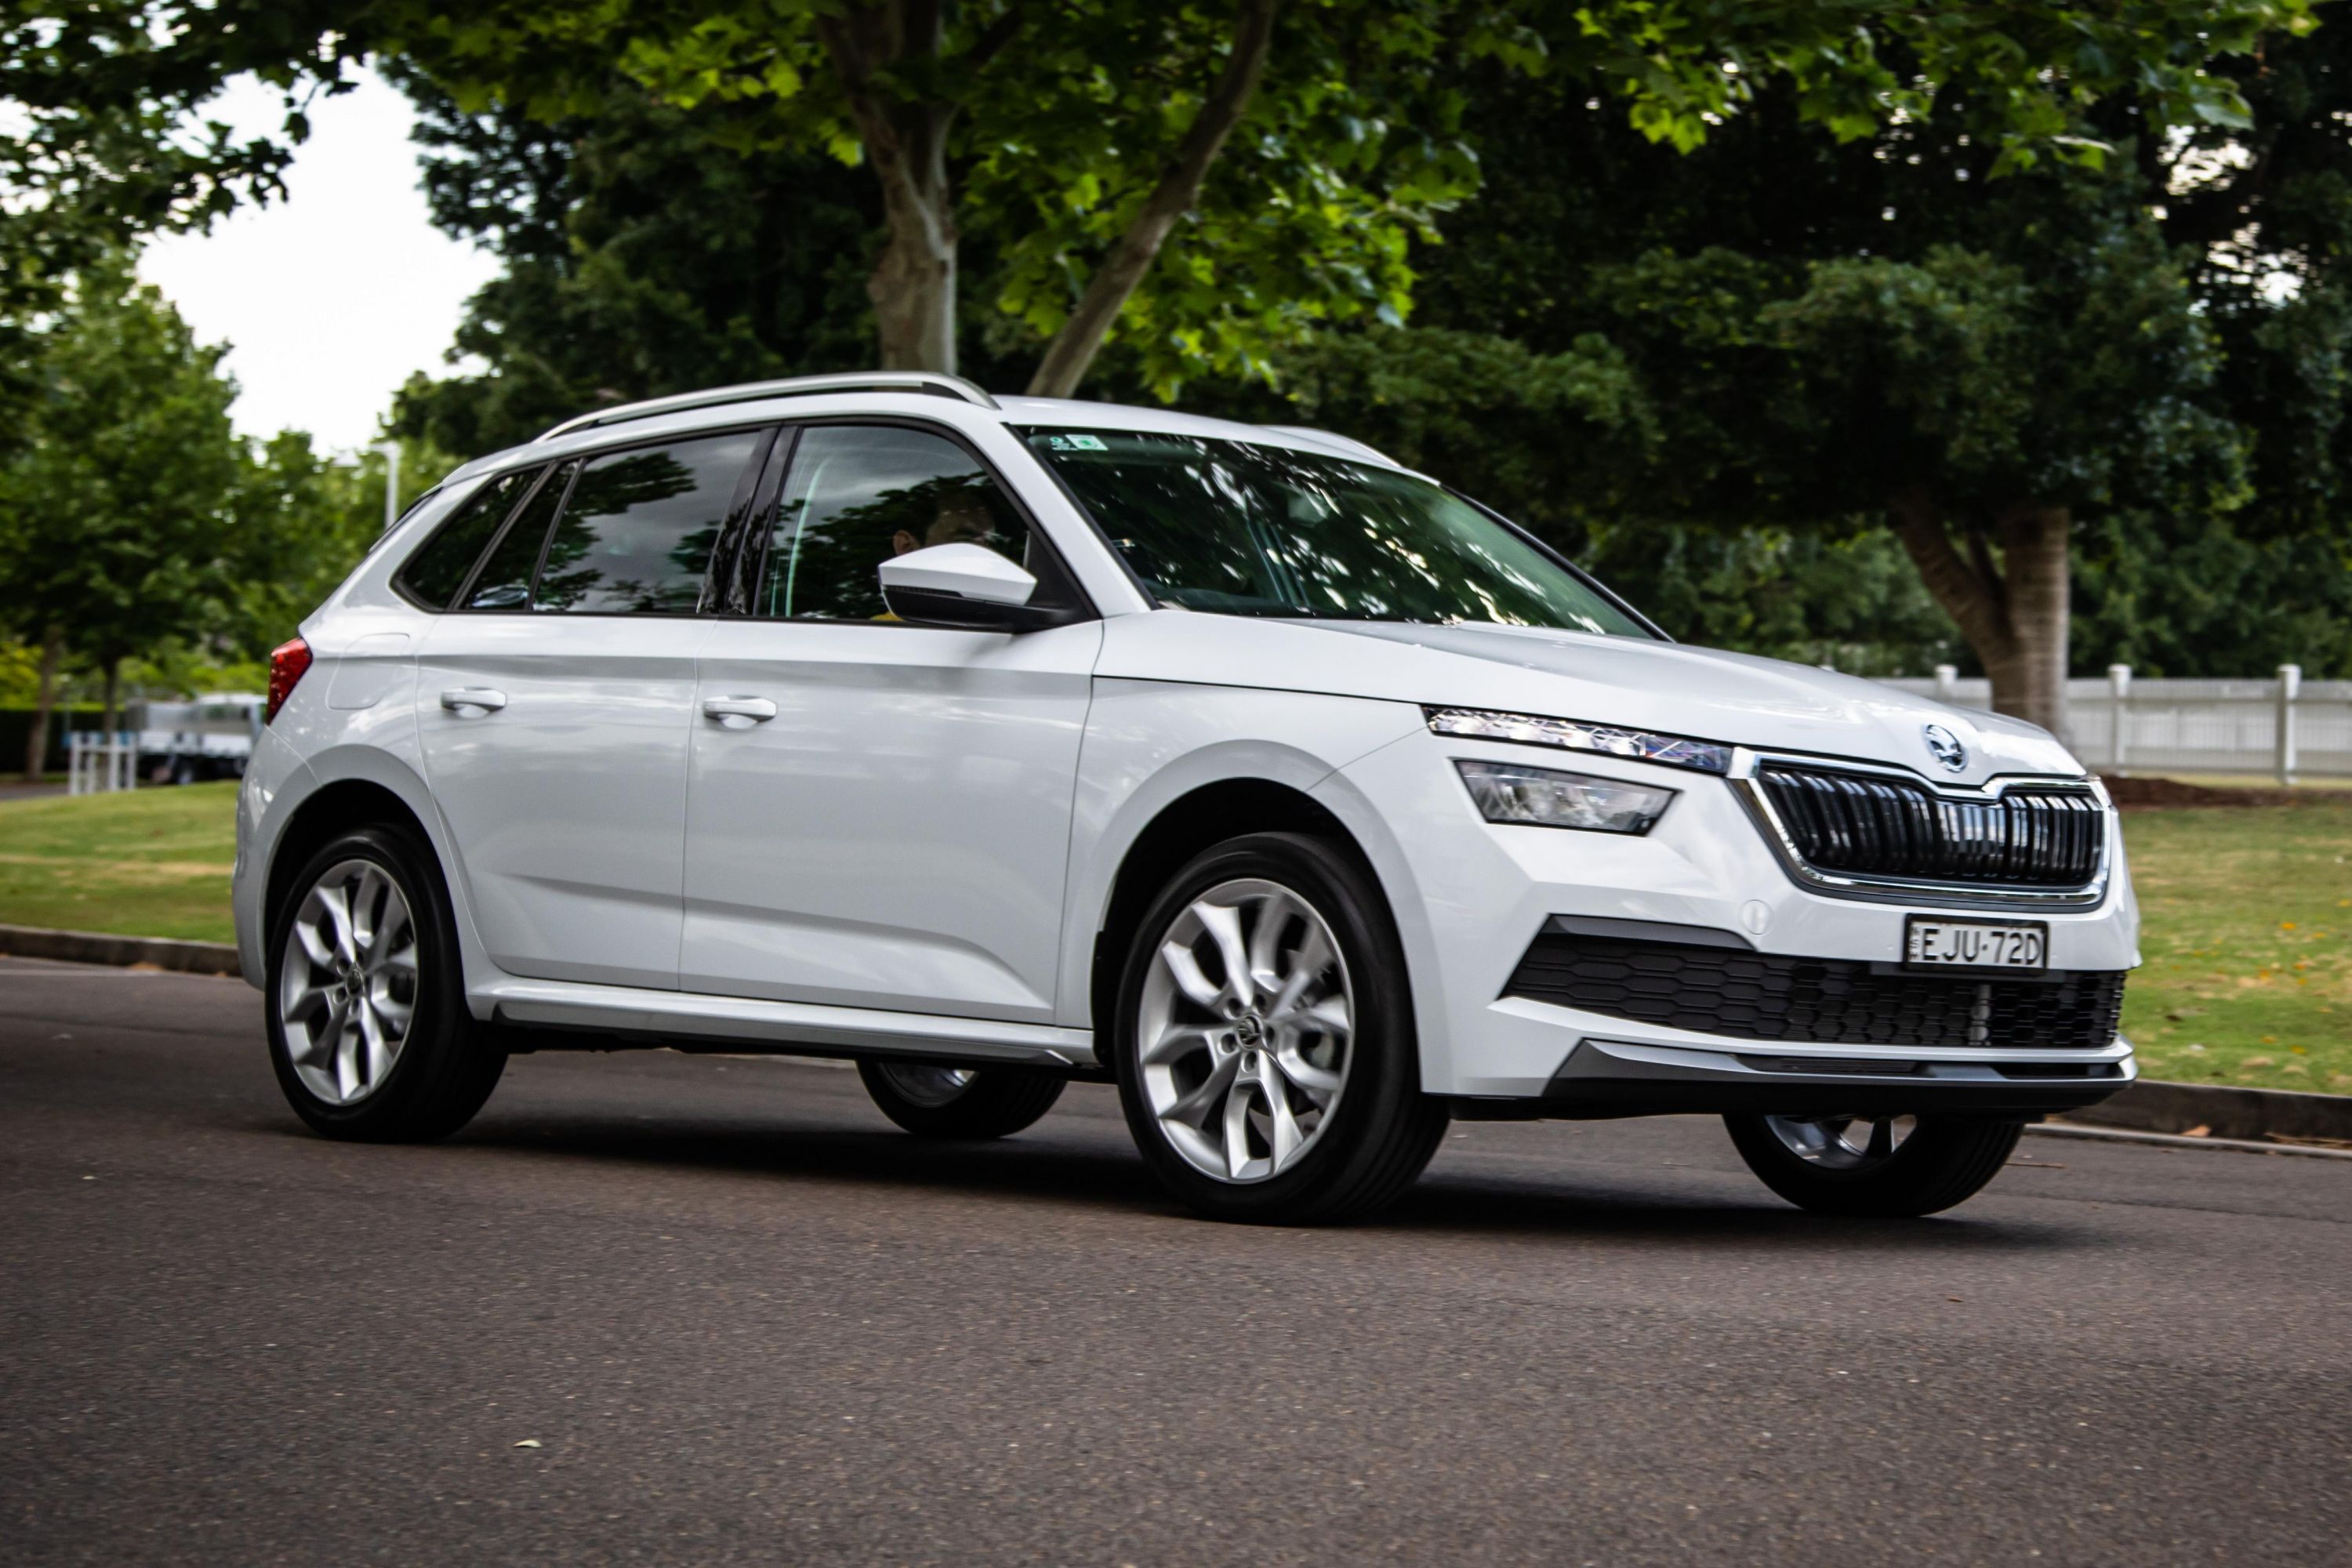 2020 Skoda Kamiq review: a solid, sensible small SUV – but others do it  better